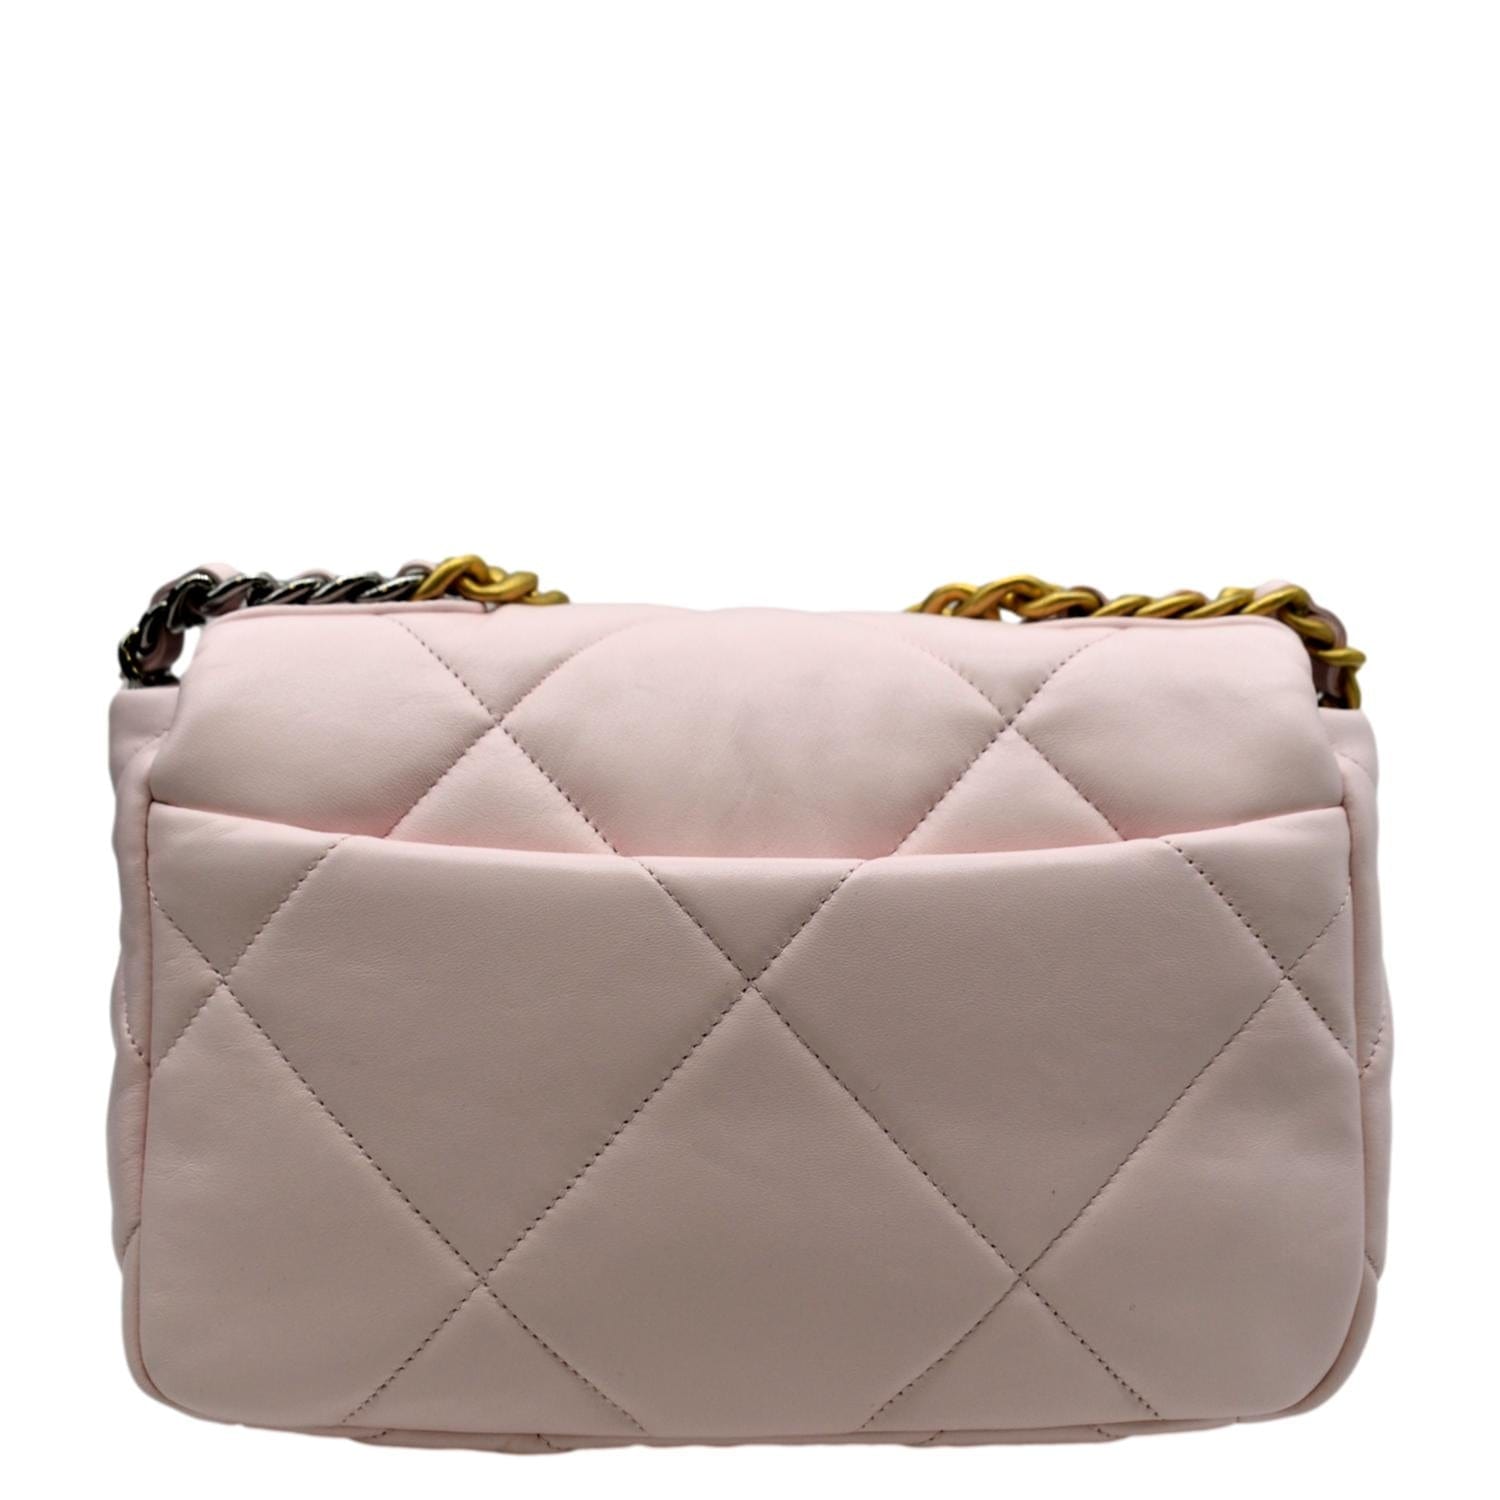 Chanel 19 Medium Quilted Lambskin Leather Flap Shoulder Bag